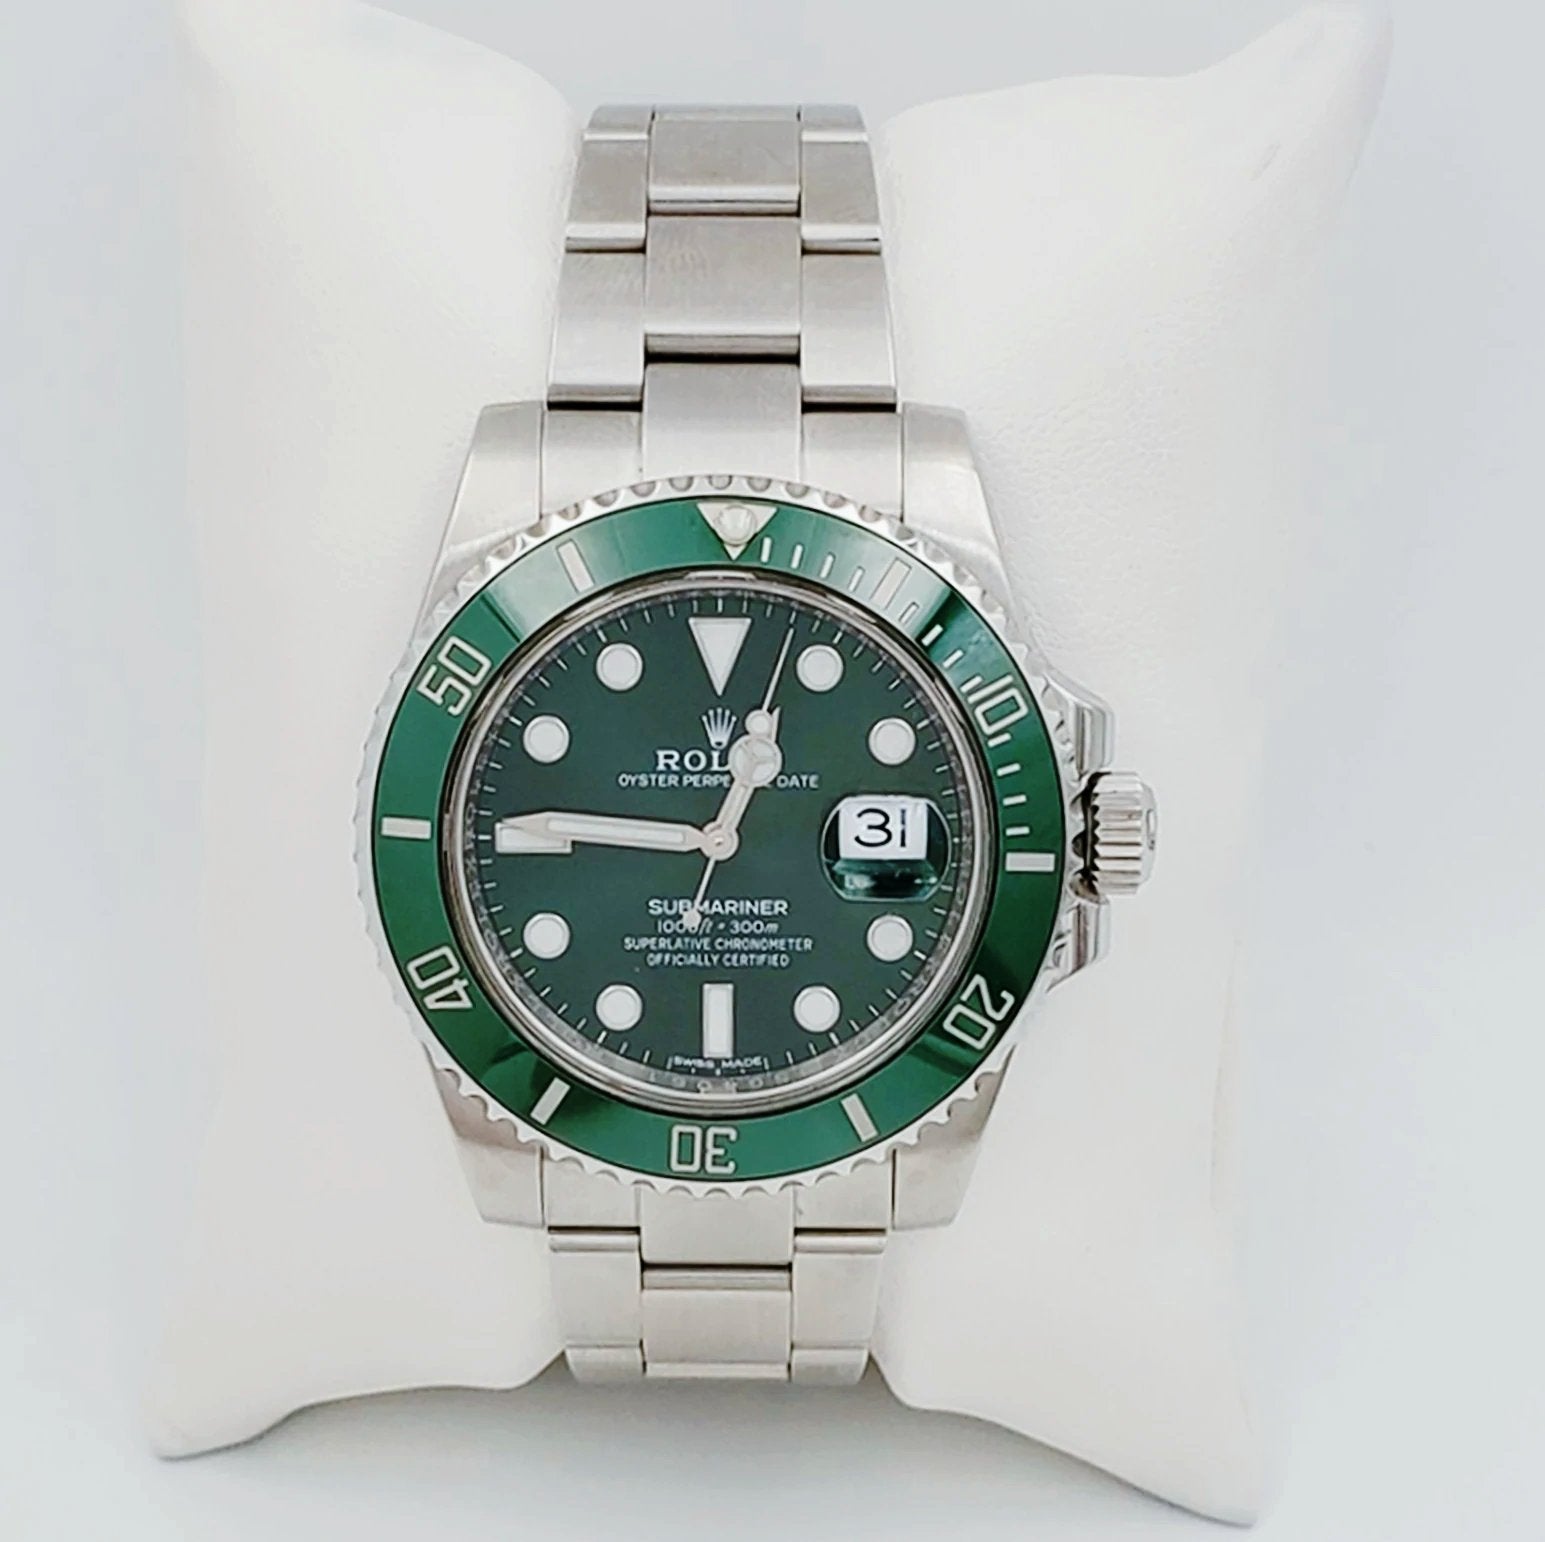 Men's Rolex 40mm Submariner Date Oyster Perpetual Stainless Steel Watch with Green Dial and Green Bezel. (NEW 116610LV)